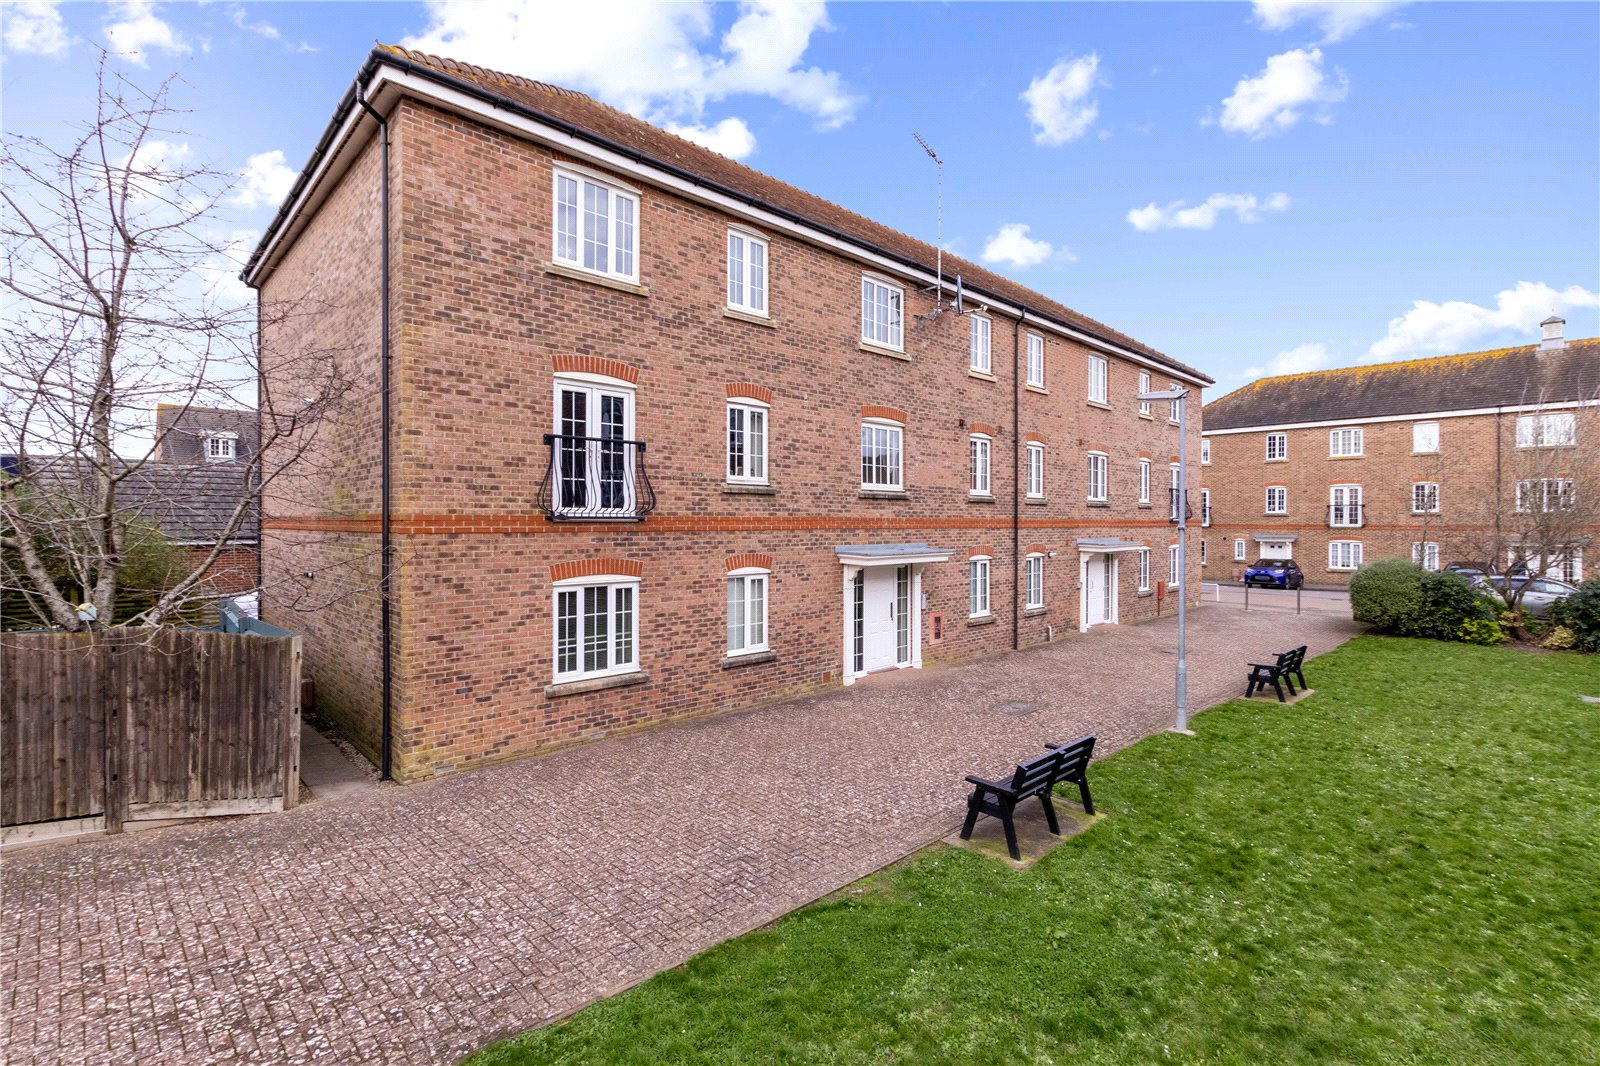 2 bed apartment for sale in The Boulevard, Tangmere - Property Image 1